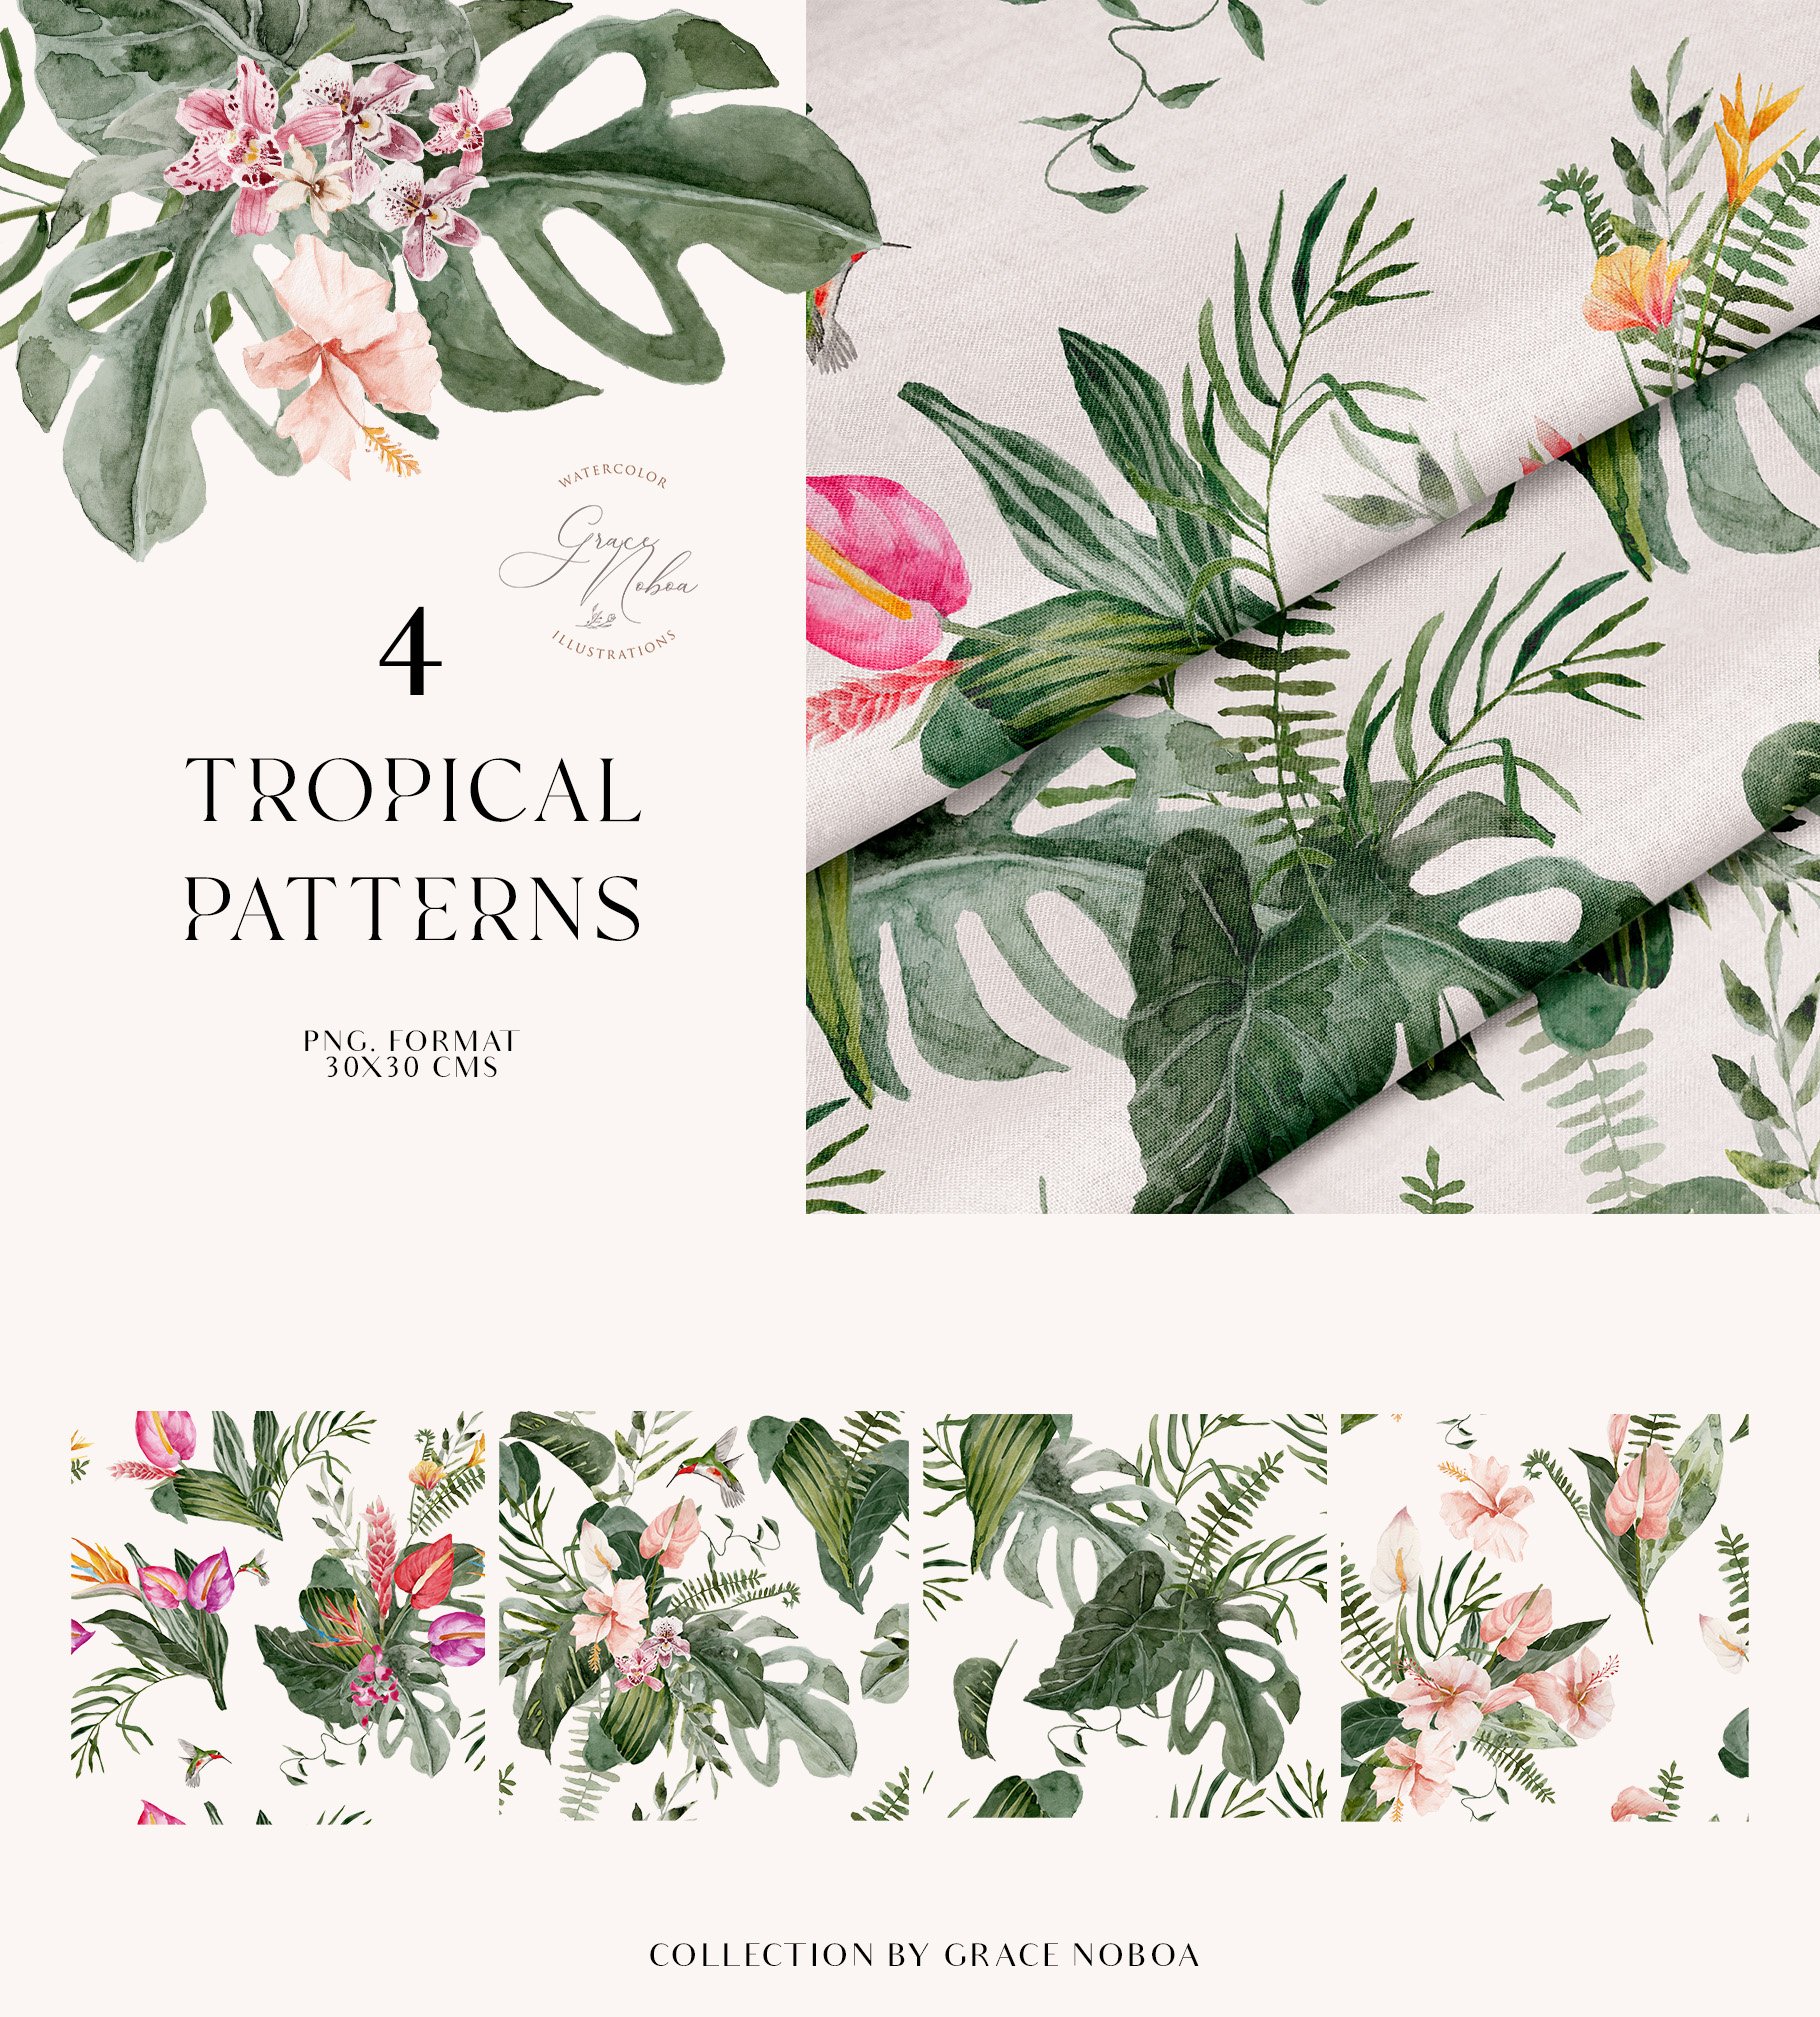 Cool tropical patterns.